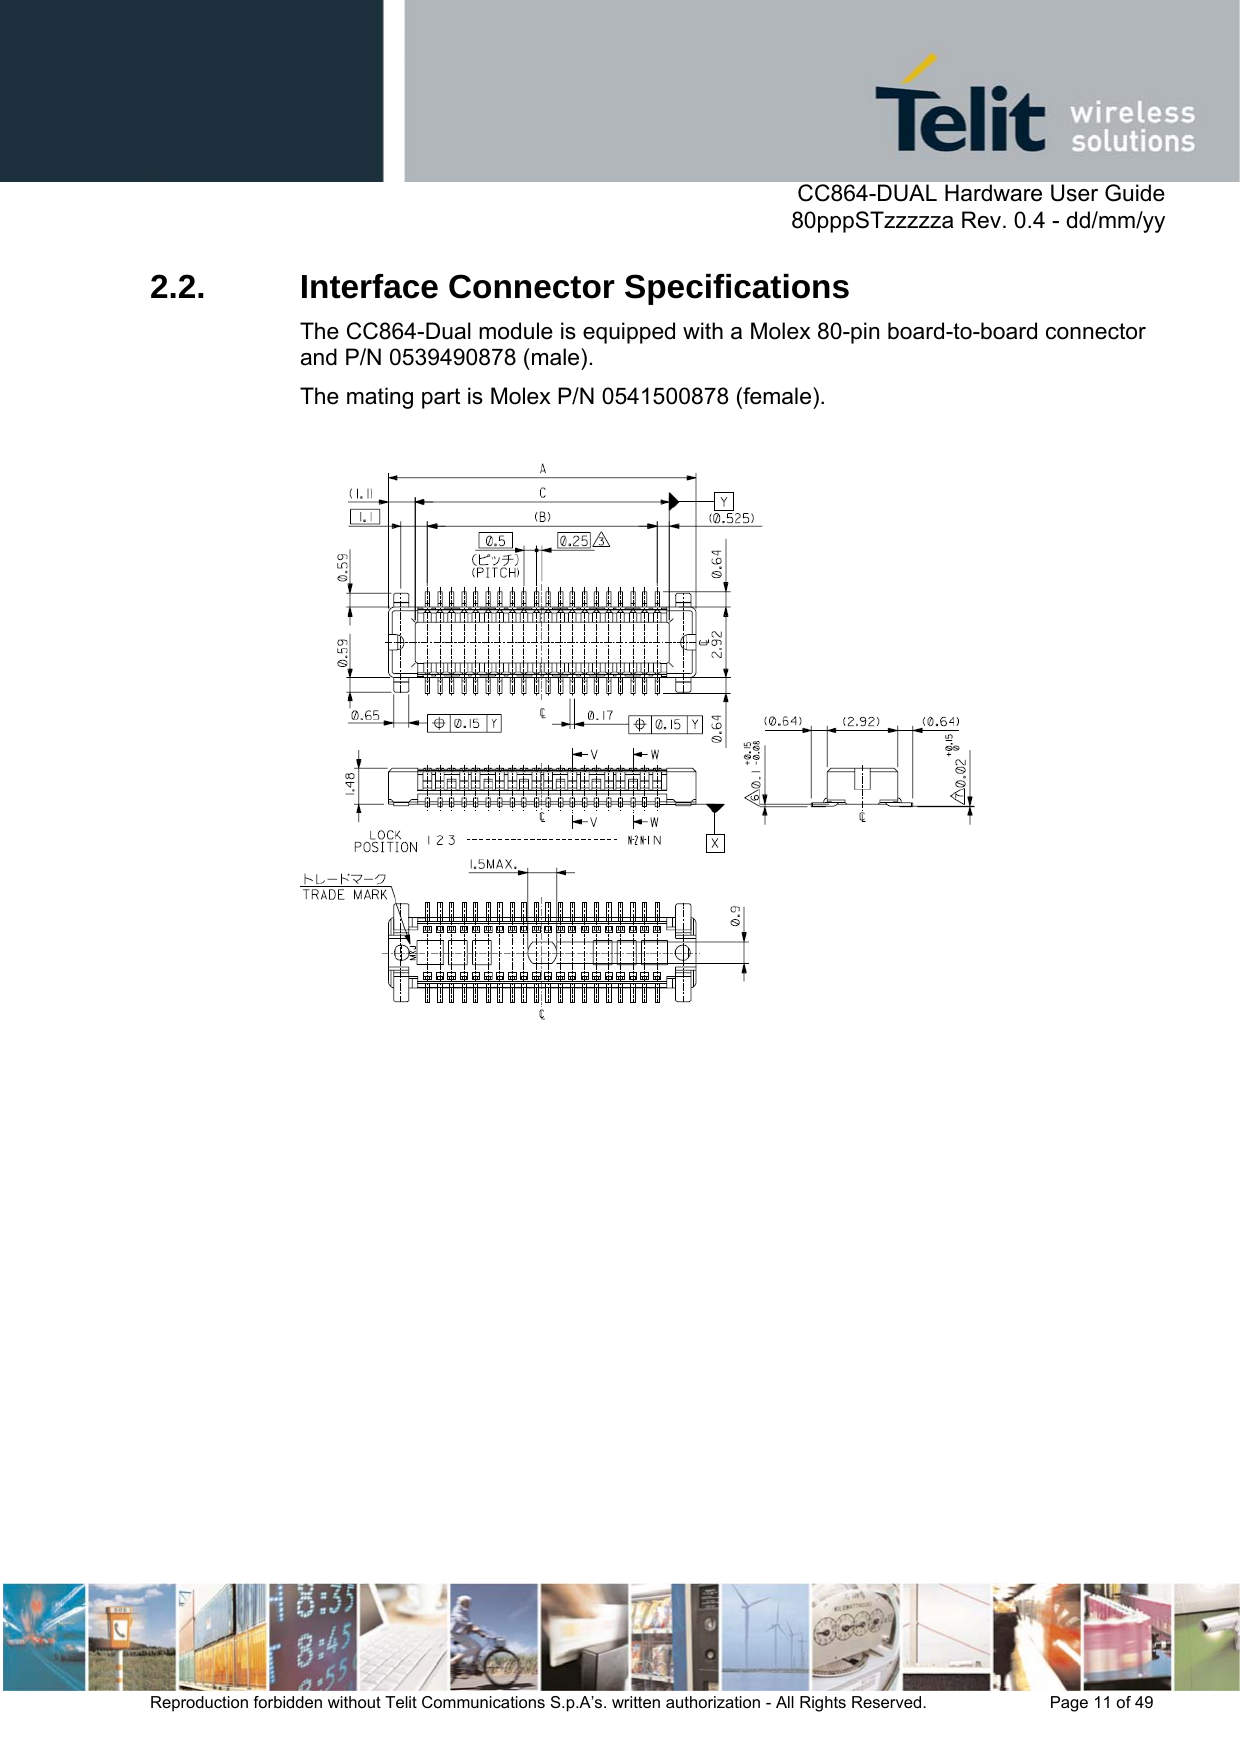      CC864-DUAL Hardware User Guide   80pppSTzzzzza Rev. 0.4 - dd/mm/yy   Reproduction forbidden without Telit Communications S.p.A’s. written authorization - All Rights Reserved.    Page 11 of 49  2.2.  Interface Connector Specifications The CC864-Dual module is equipped with a Molex 80-pin board-to-board connector and P/N 0539490878 (male).  The mating part is Molex P/N 0541500878 (female).    